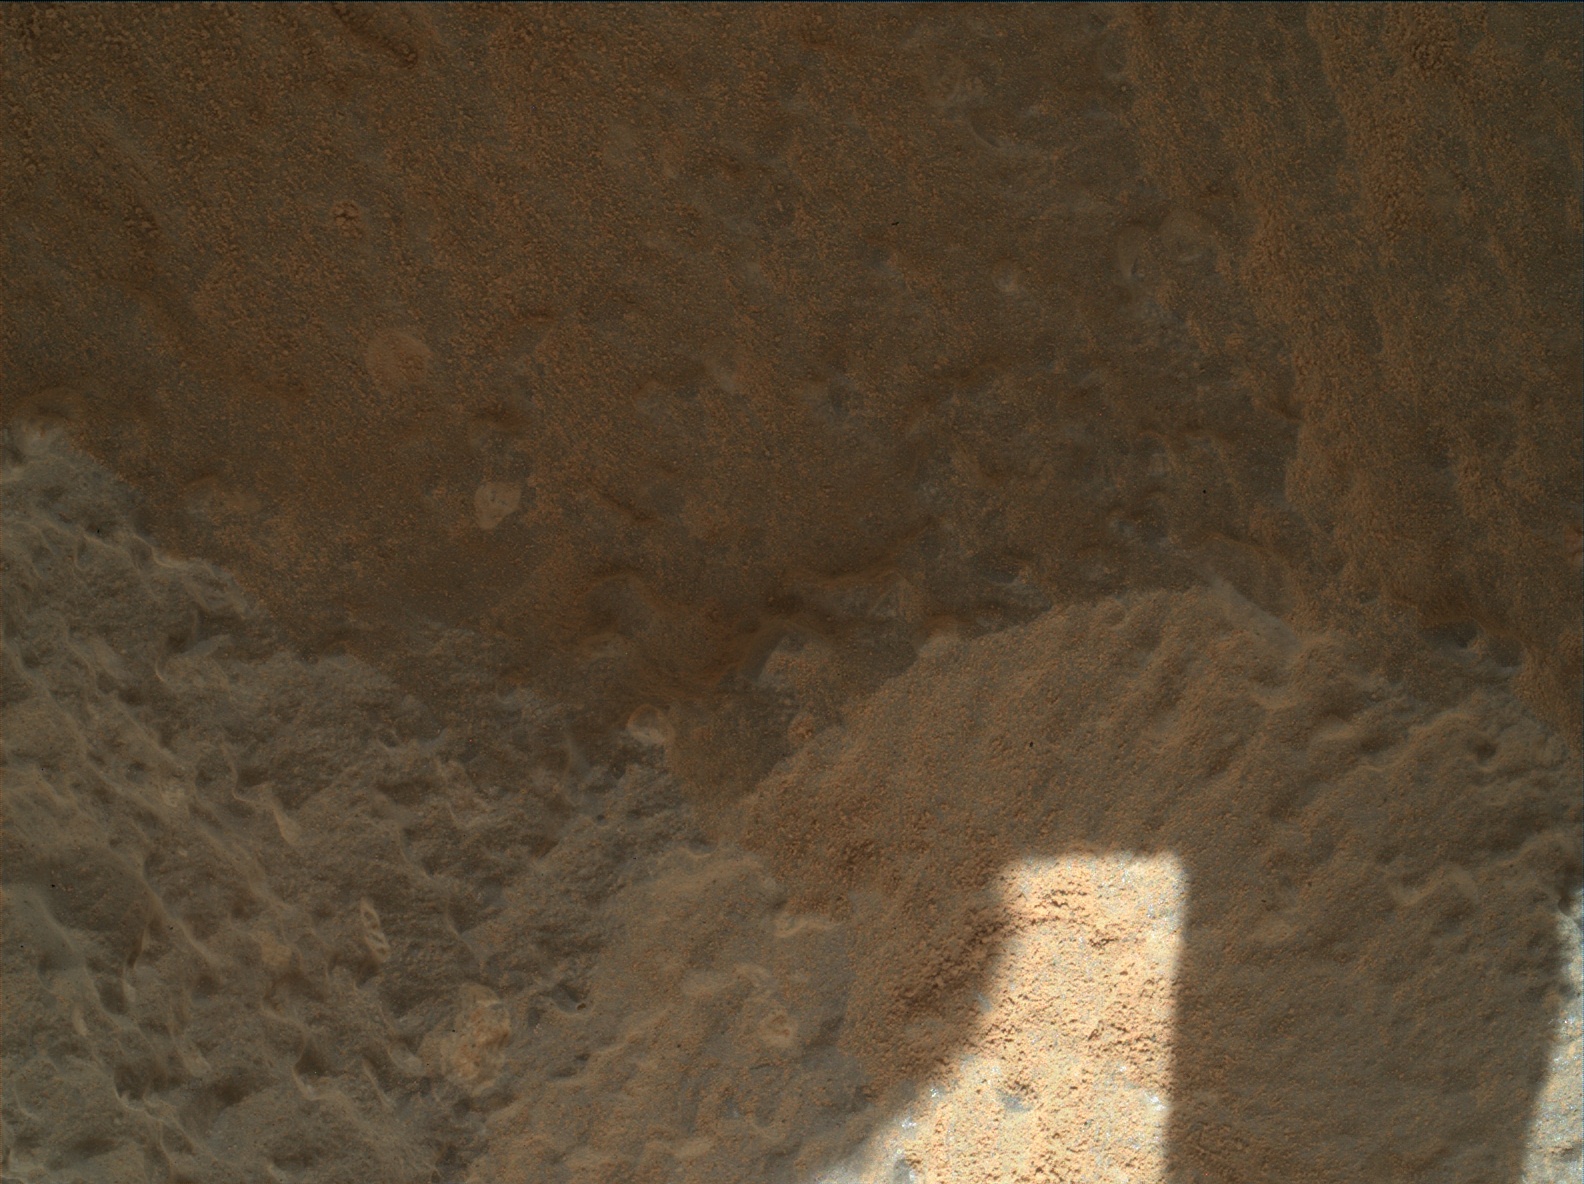 Nasa's Mars rover Curiosity acquired this image using its Mars Hand Lens Imager (MAHLI) on Sol 633